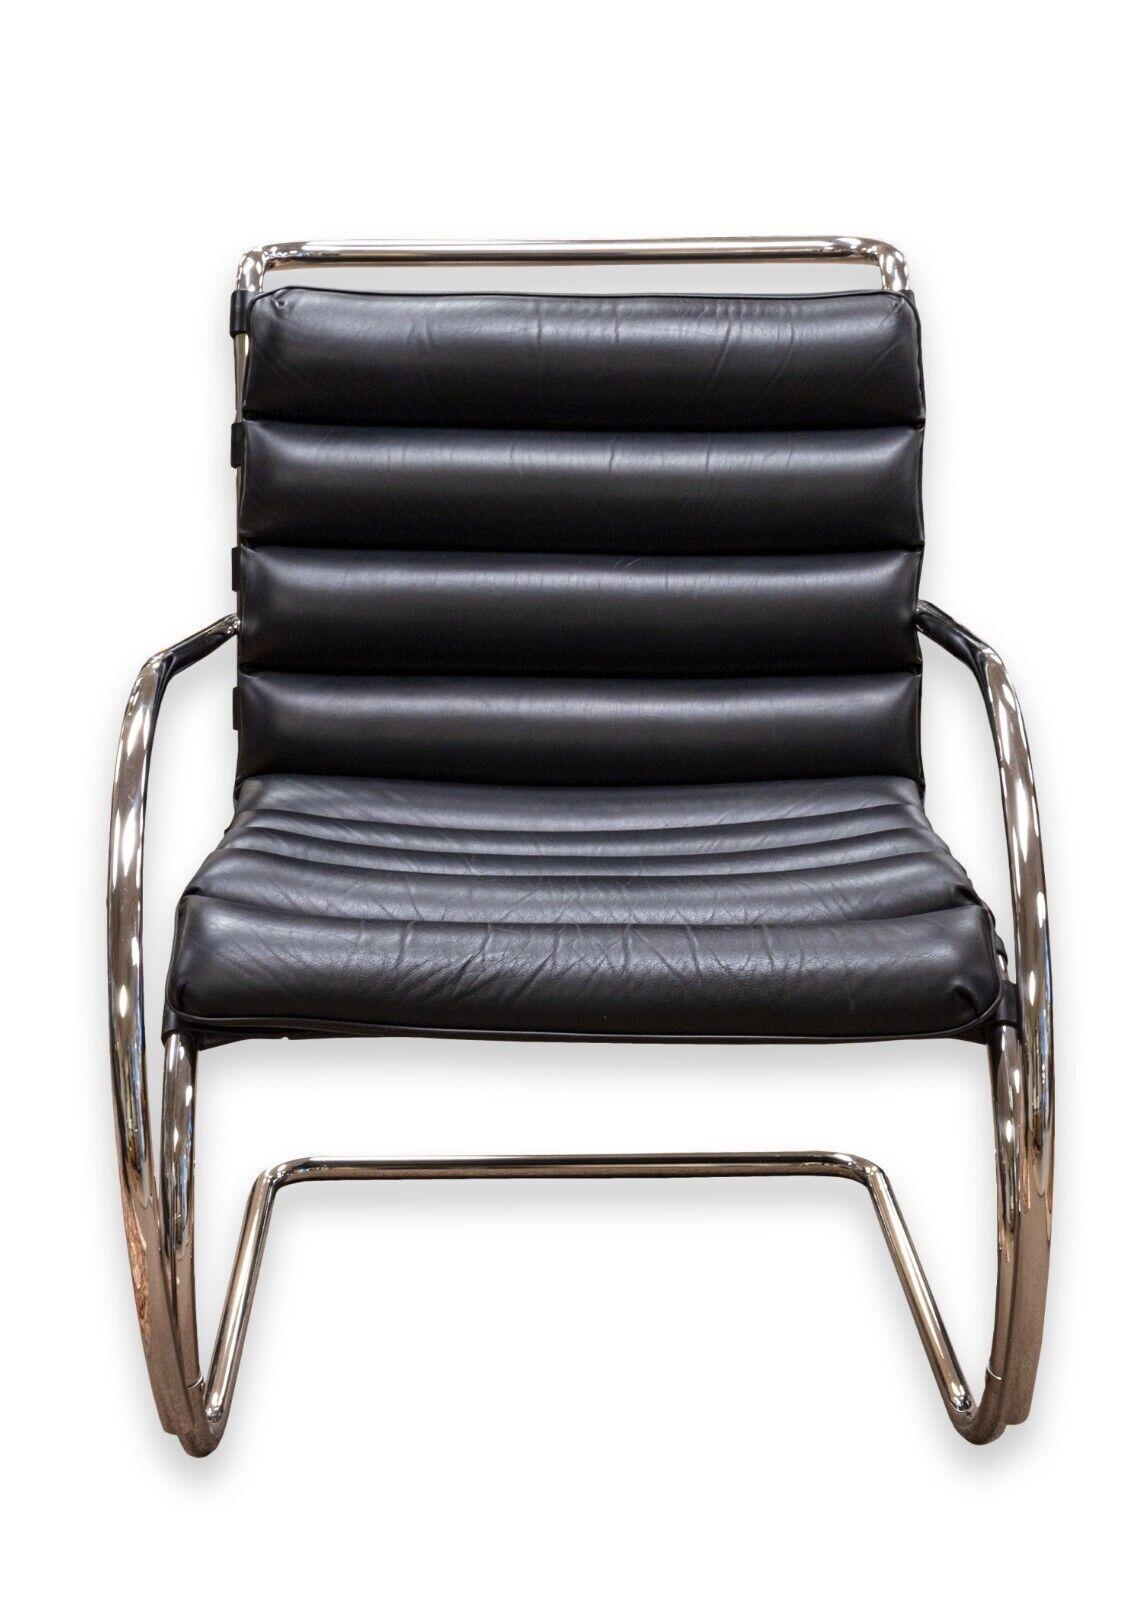 Mies van der Rohe MR lounge chair. A gorgeous lounge chair with a sophisticated, elegant cantilever design with tubular chrome steel, and padded black leather seats. This chair was originally designed by Mies in 1927 for the Weissenhof exhibit in